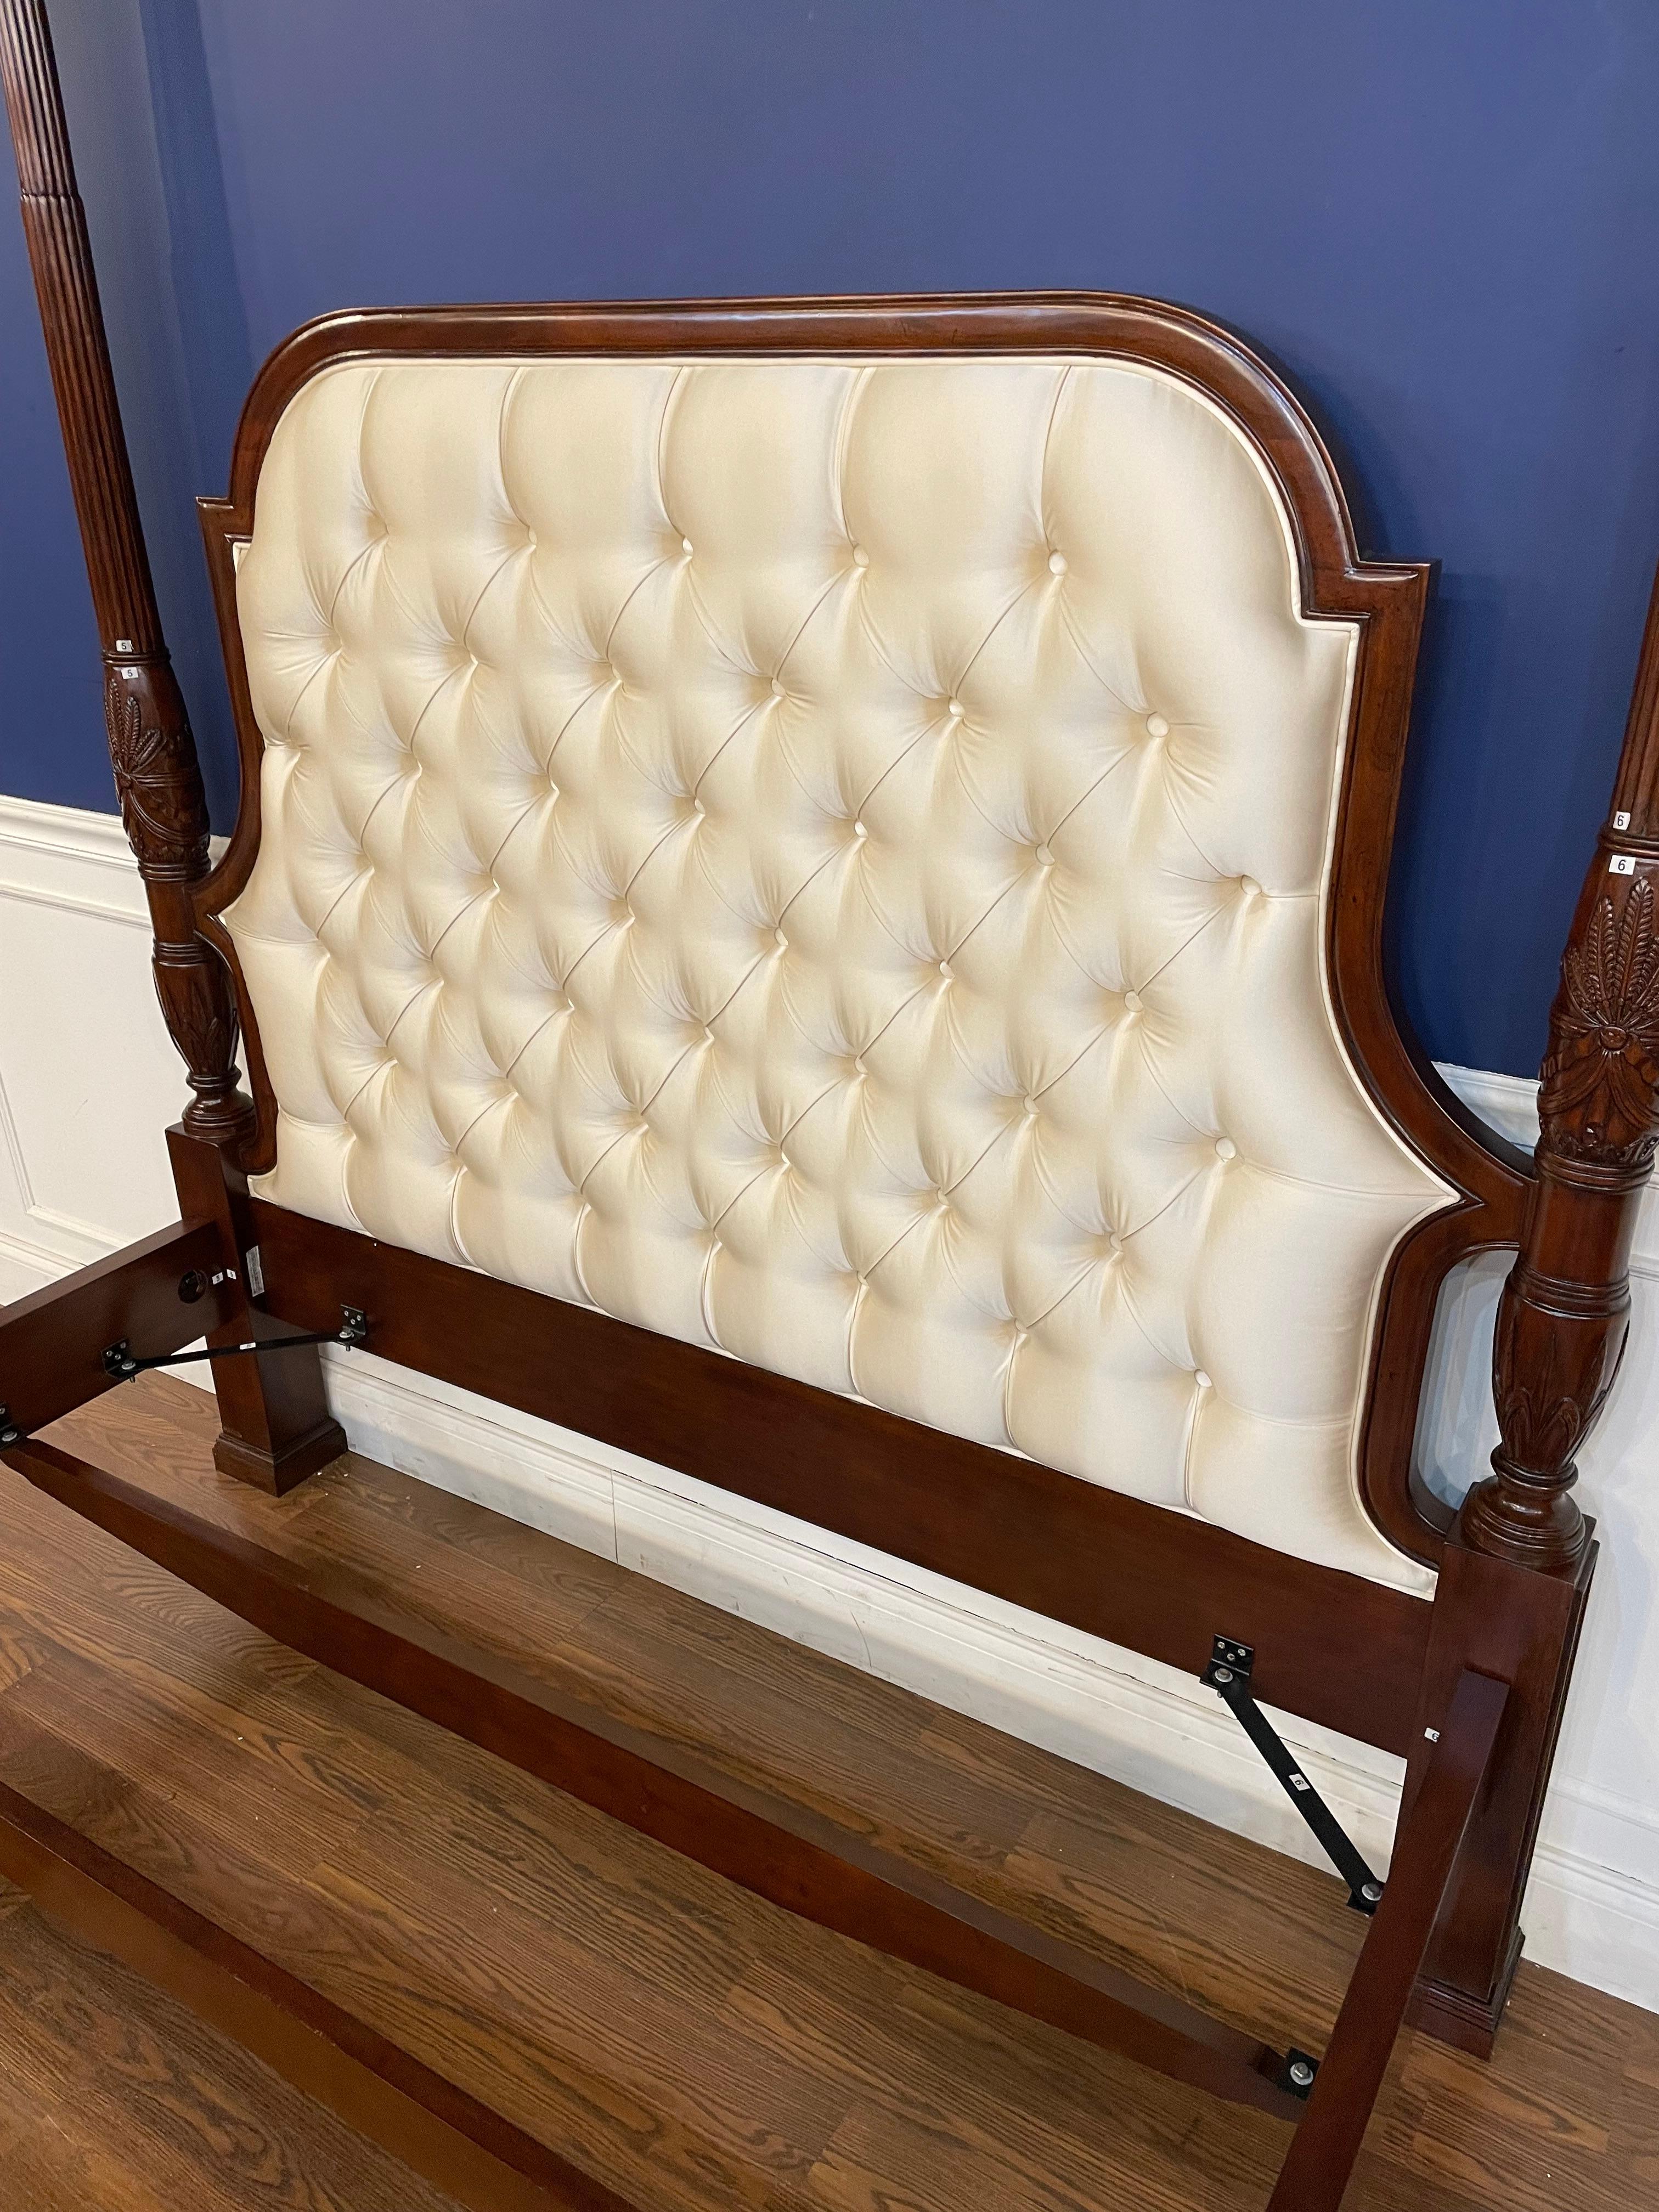 Philippine Scarborough House Queen Size Upholstered Mahogany FourPost Bed - Showroom Sample For Sale